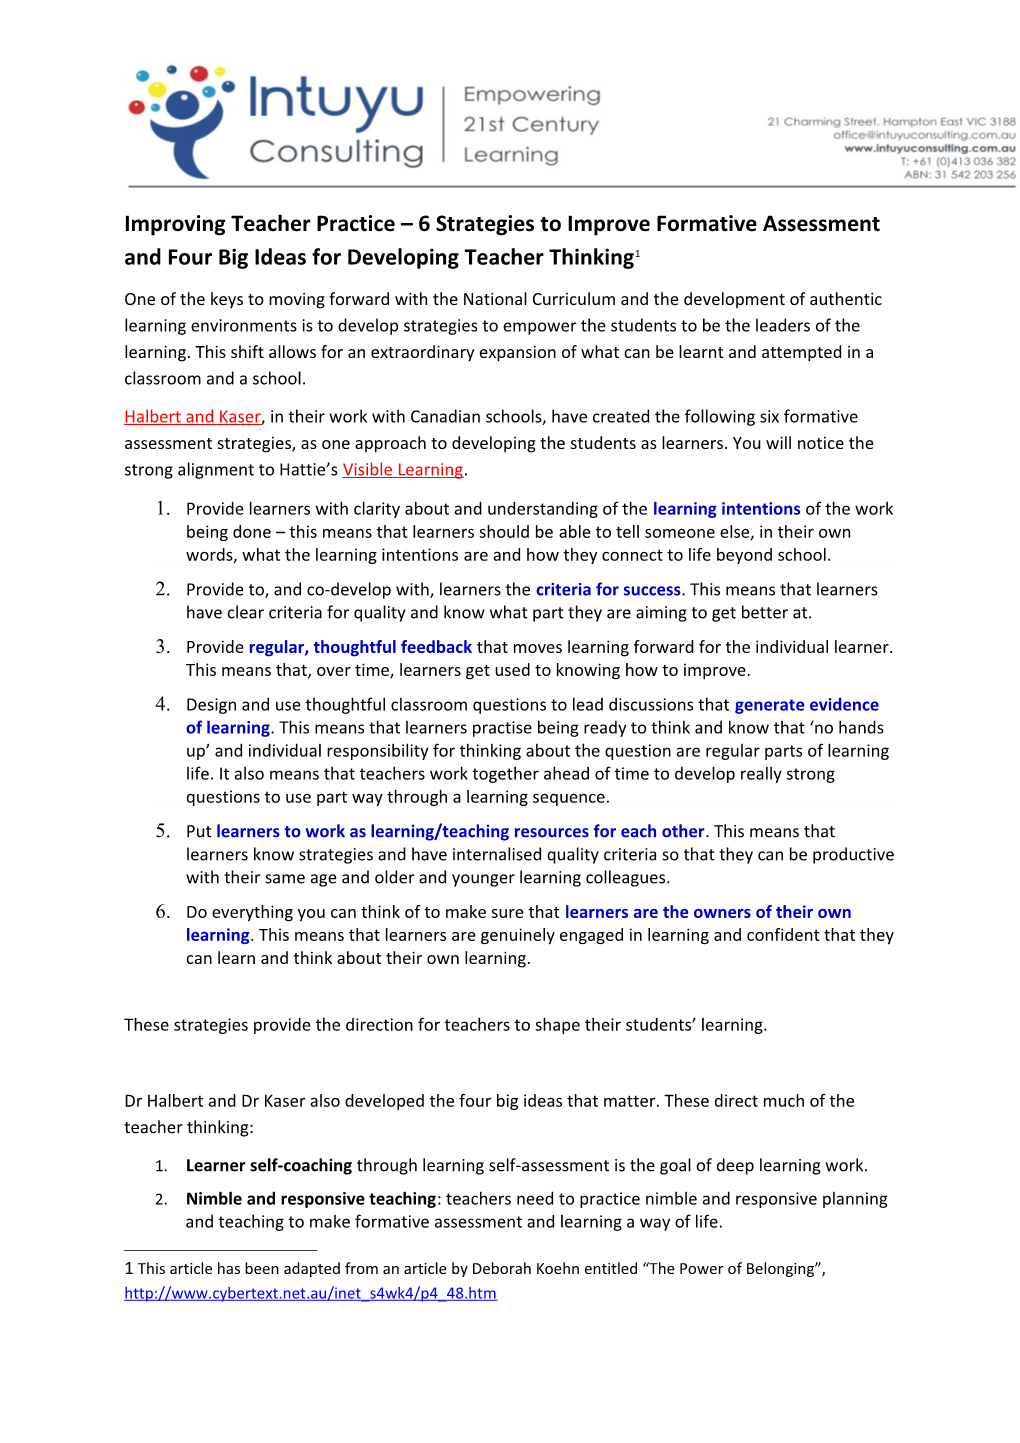 Improving Teacher Practice 6 Strategies to Improve Formative Assessment and Four Big Ideas